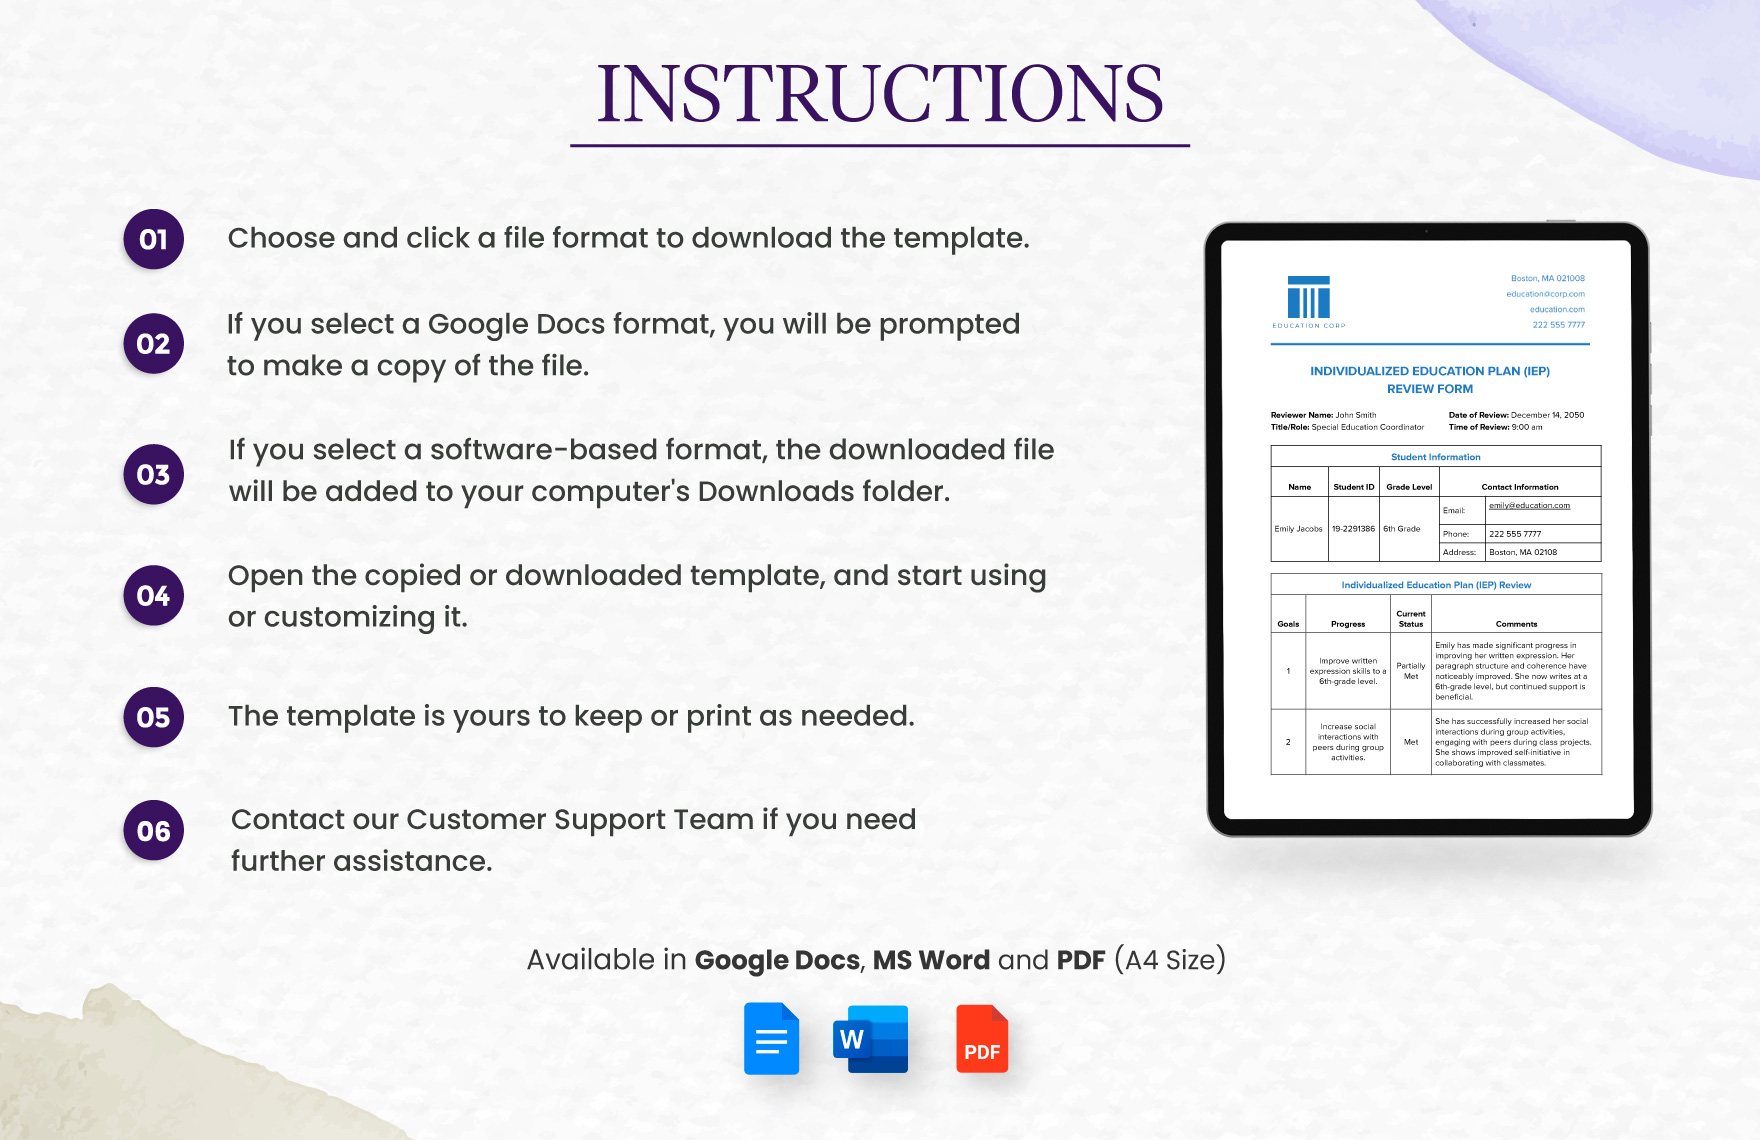 Individualized Education Plan (IEP) Review Form Template